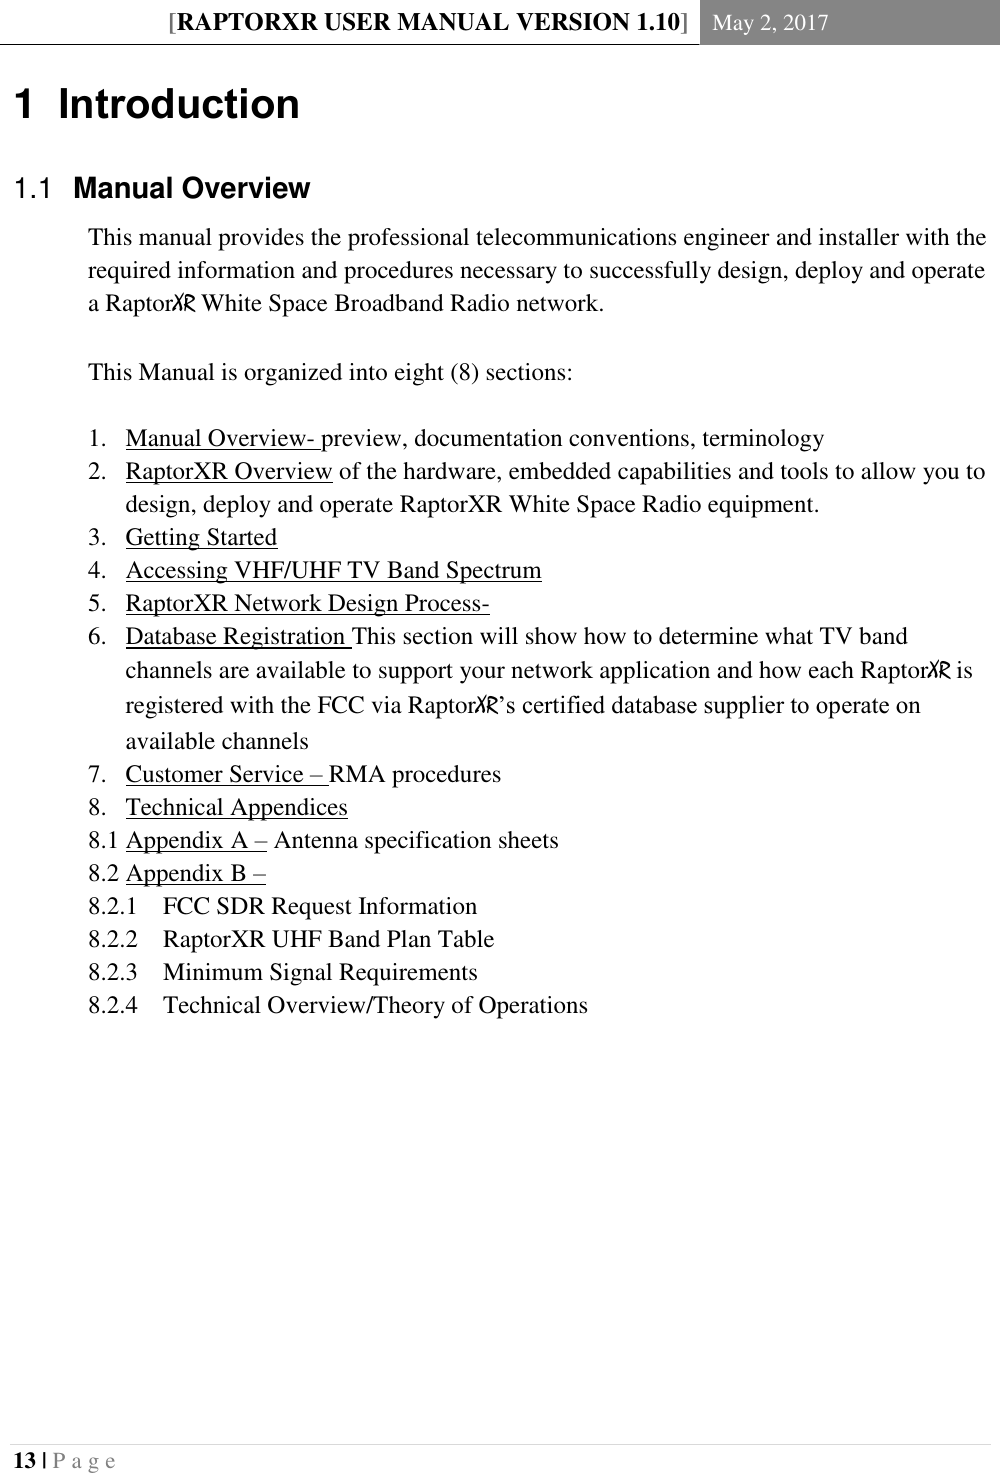 [RAPTORXR USER MANUAL VERSION 1.10] May 2, 2017  13 | P a g e   1  Introduction   Manual Overview 1.1This manual provides the professional telecommunications engineer and installer with the required information and procedures necessary to successfully design, deploy and operate a RaptorXR White Space Broadband Radio network.  This Manual is organized into eight (8) sections:  1. Manual Overview- preview, documentation conventions, terminology 2. RaptorXR Overview of the hardware, embedded capabilities and tools to allow you to design, deploy and operate RaptorXR White Space Radio equipment. 3. Getting Started 4. Accessing VHF/UHF TV Band Spectrum 5. RaptorXR Network Design Process-  6. Database Registration This section will show how to determine what TV band channels are available to support your network application and how each RaptorXR is registered with the FCC via RaptorXR’s certified database supplier to operate on available channels 7. Customer Service – RMA procedures 8. Technical Appendices  8.1 Appendix A – Antenna specification sheets 8.2 Appendix B –  8.2.1 FCC SDR Request Information 8.2.2 RaptorXR UHF Band Plan Table 8.2.3 Minimum Signal Requirements 8.2.4 Technical Overview/Theory of Operations         